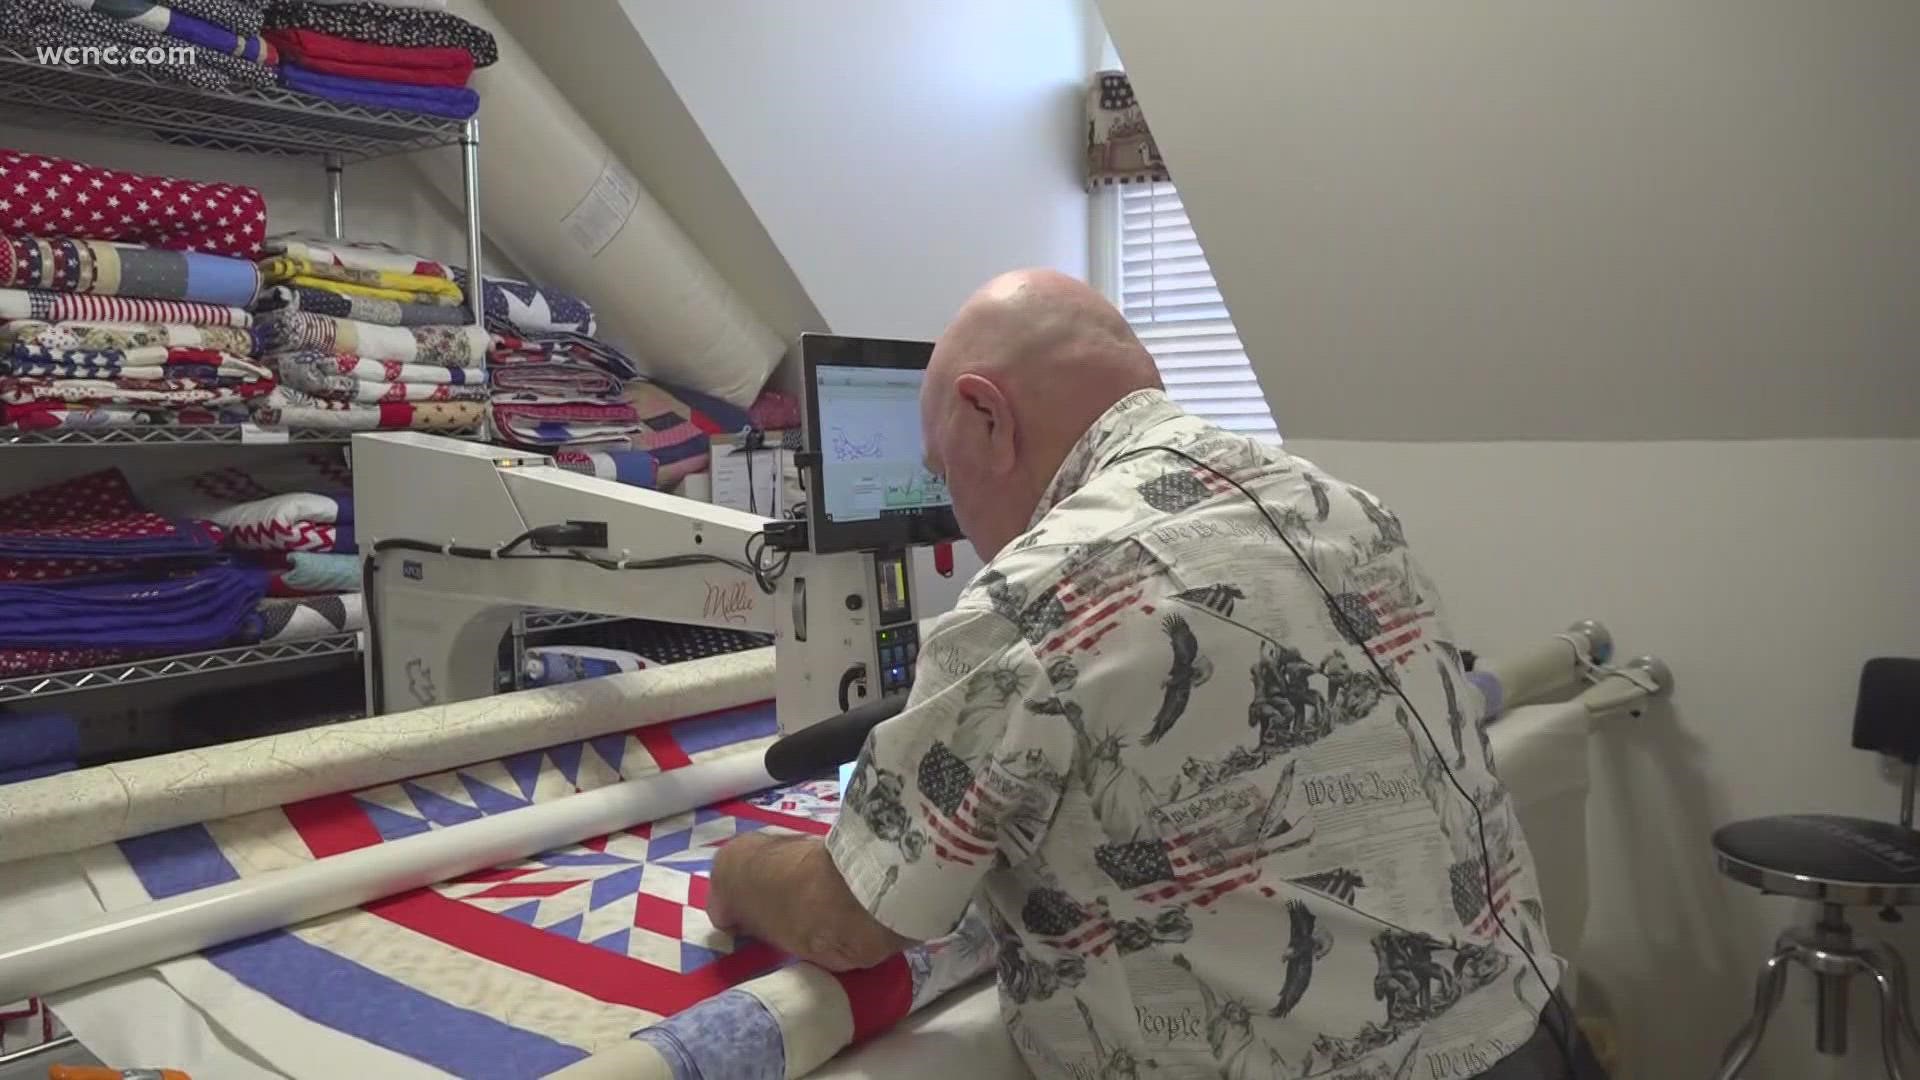 Over the years, hundreds of veterans in the Rock Hill, South Carolina area were awarded Quilts of Valor.